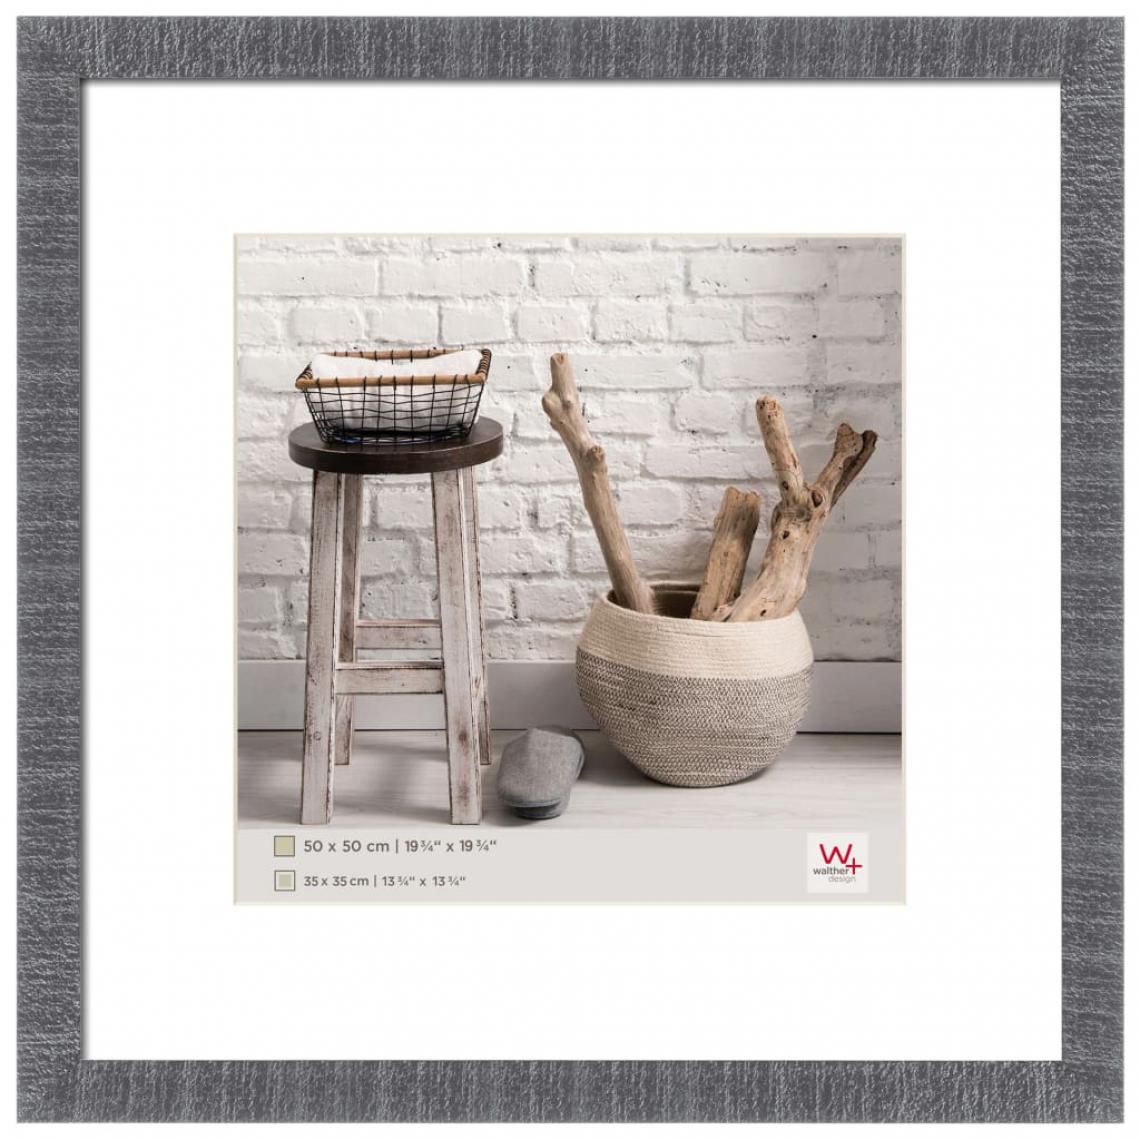 Walther - Walther Design Cadre photo Home 50x50 cm Gris - Cadres, pêle-mêle